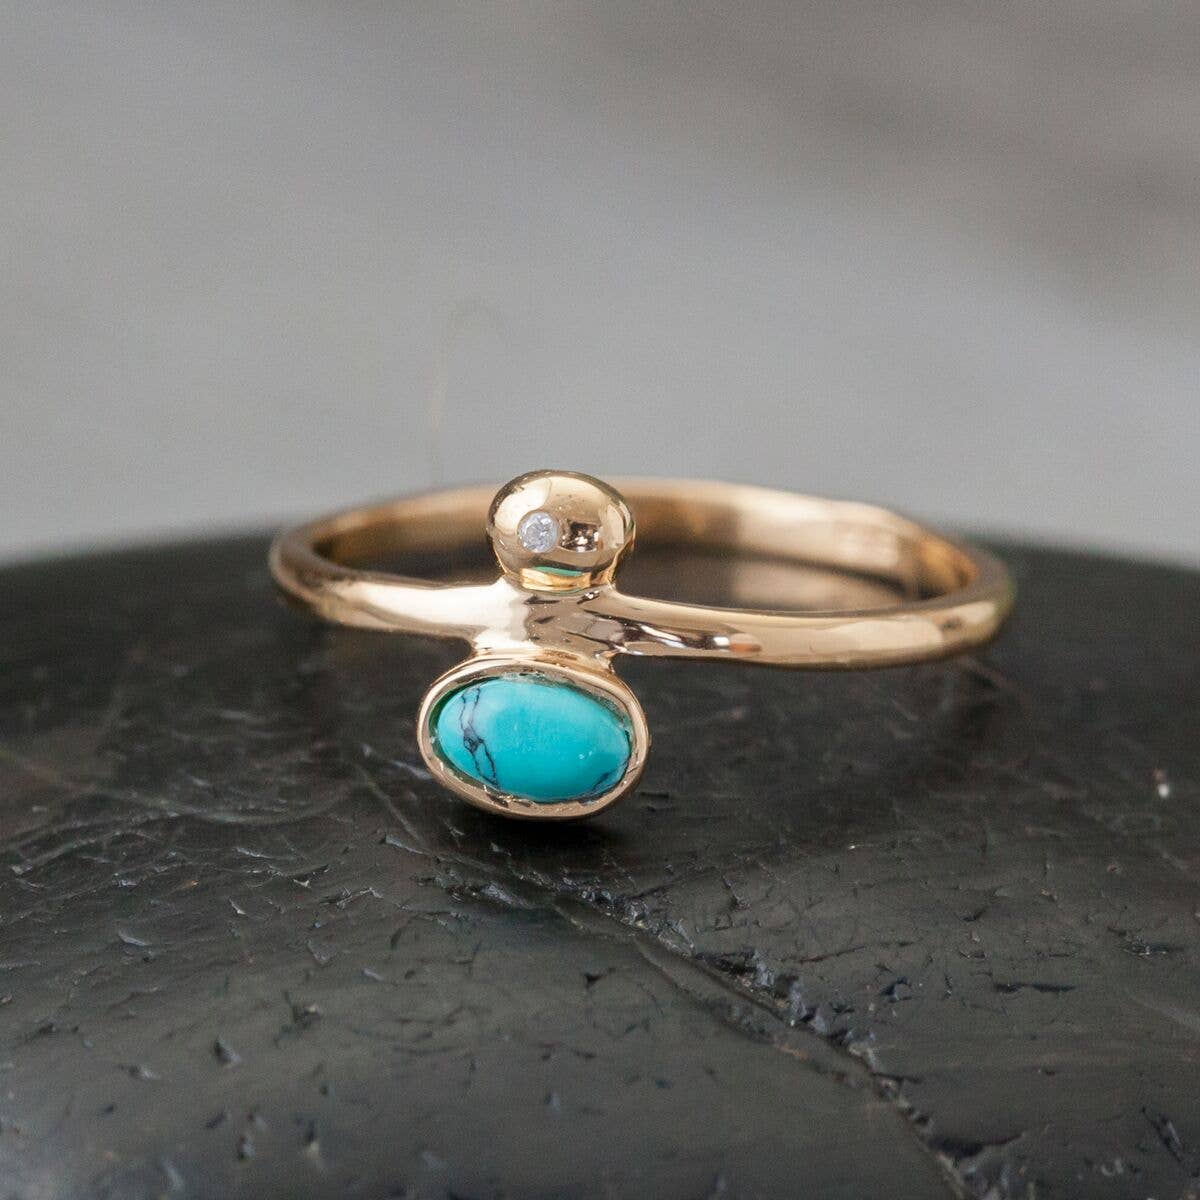 Gold Plated Balance Ring with Turquoise Stone